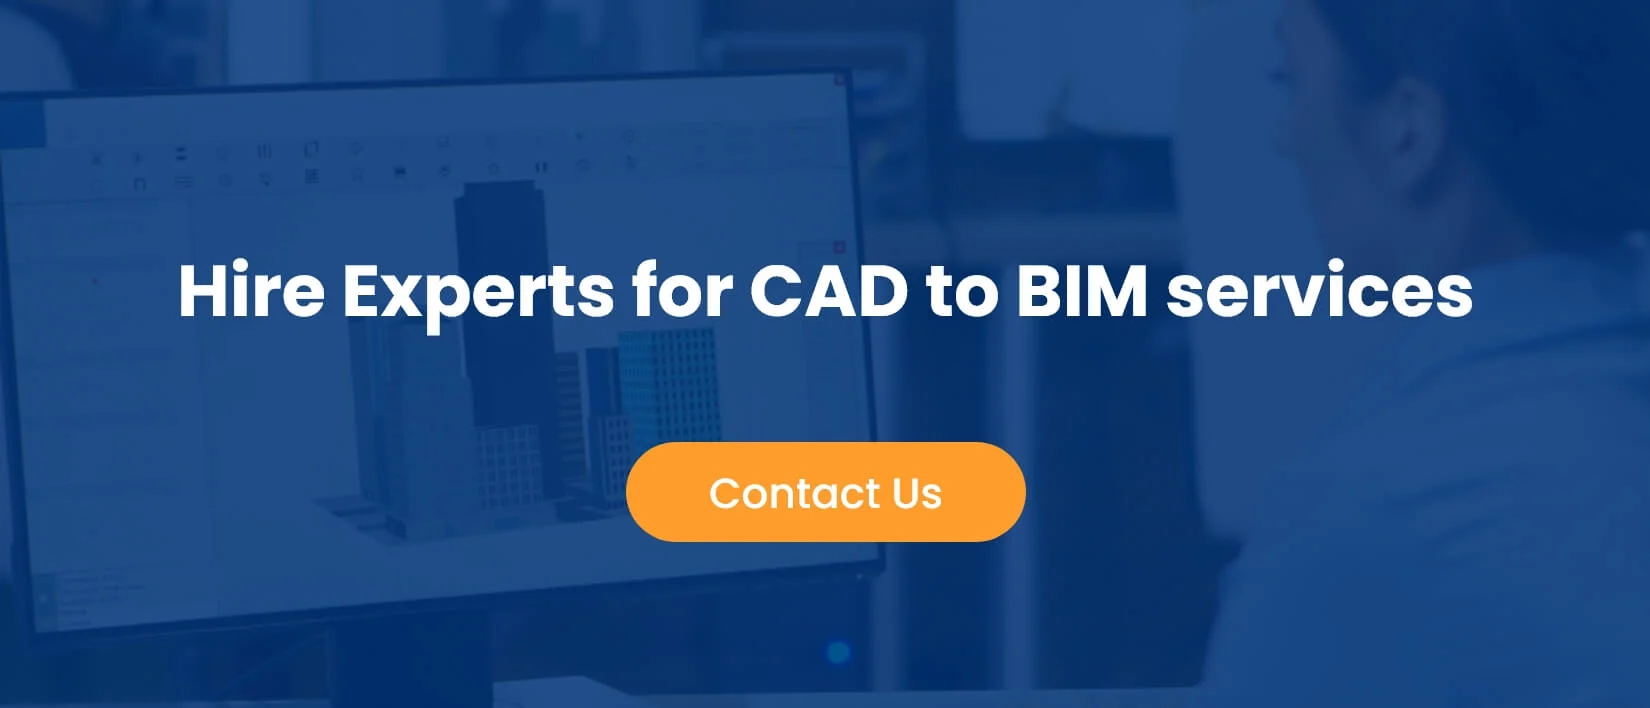 Hire Experts for CAD to BIM services